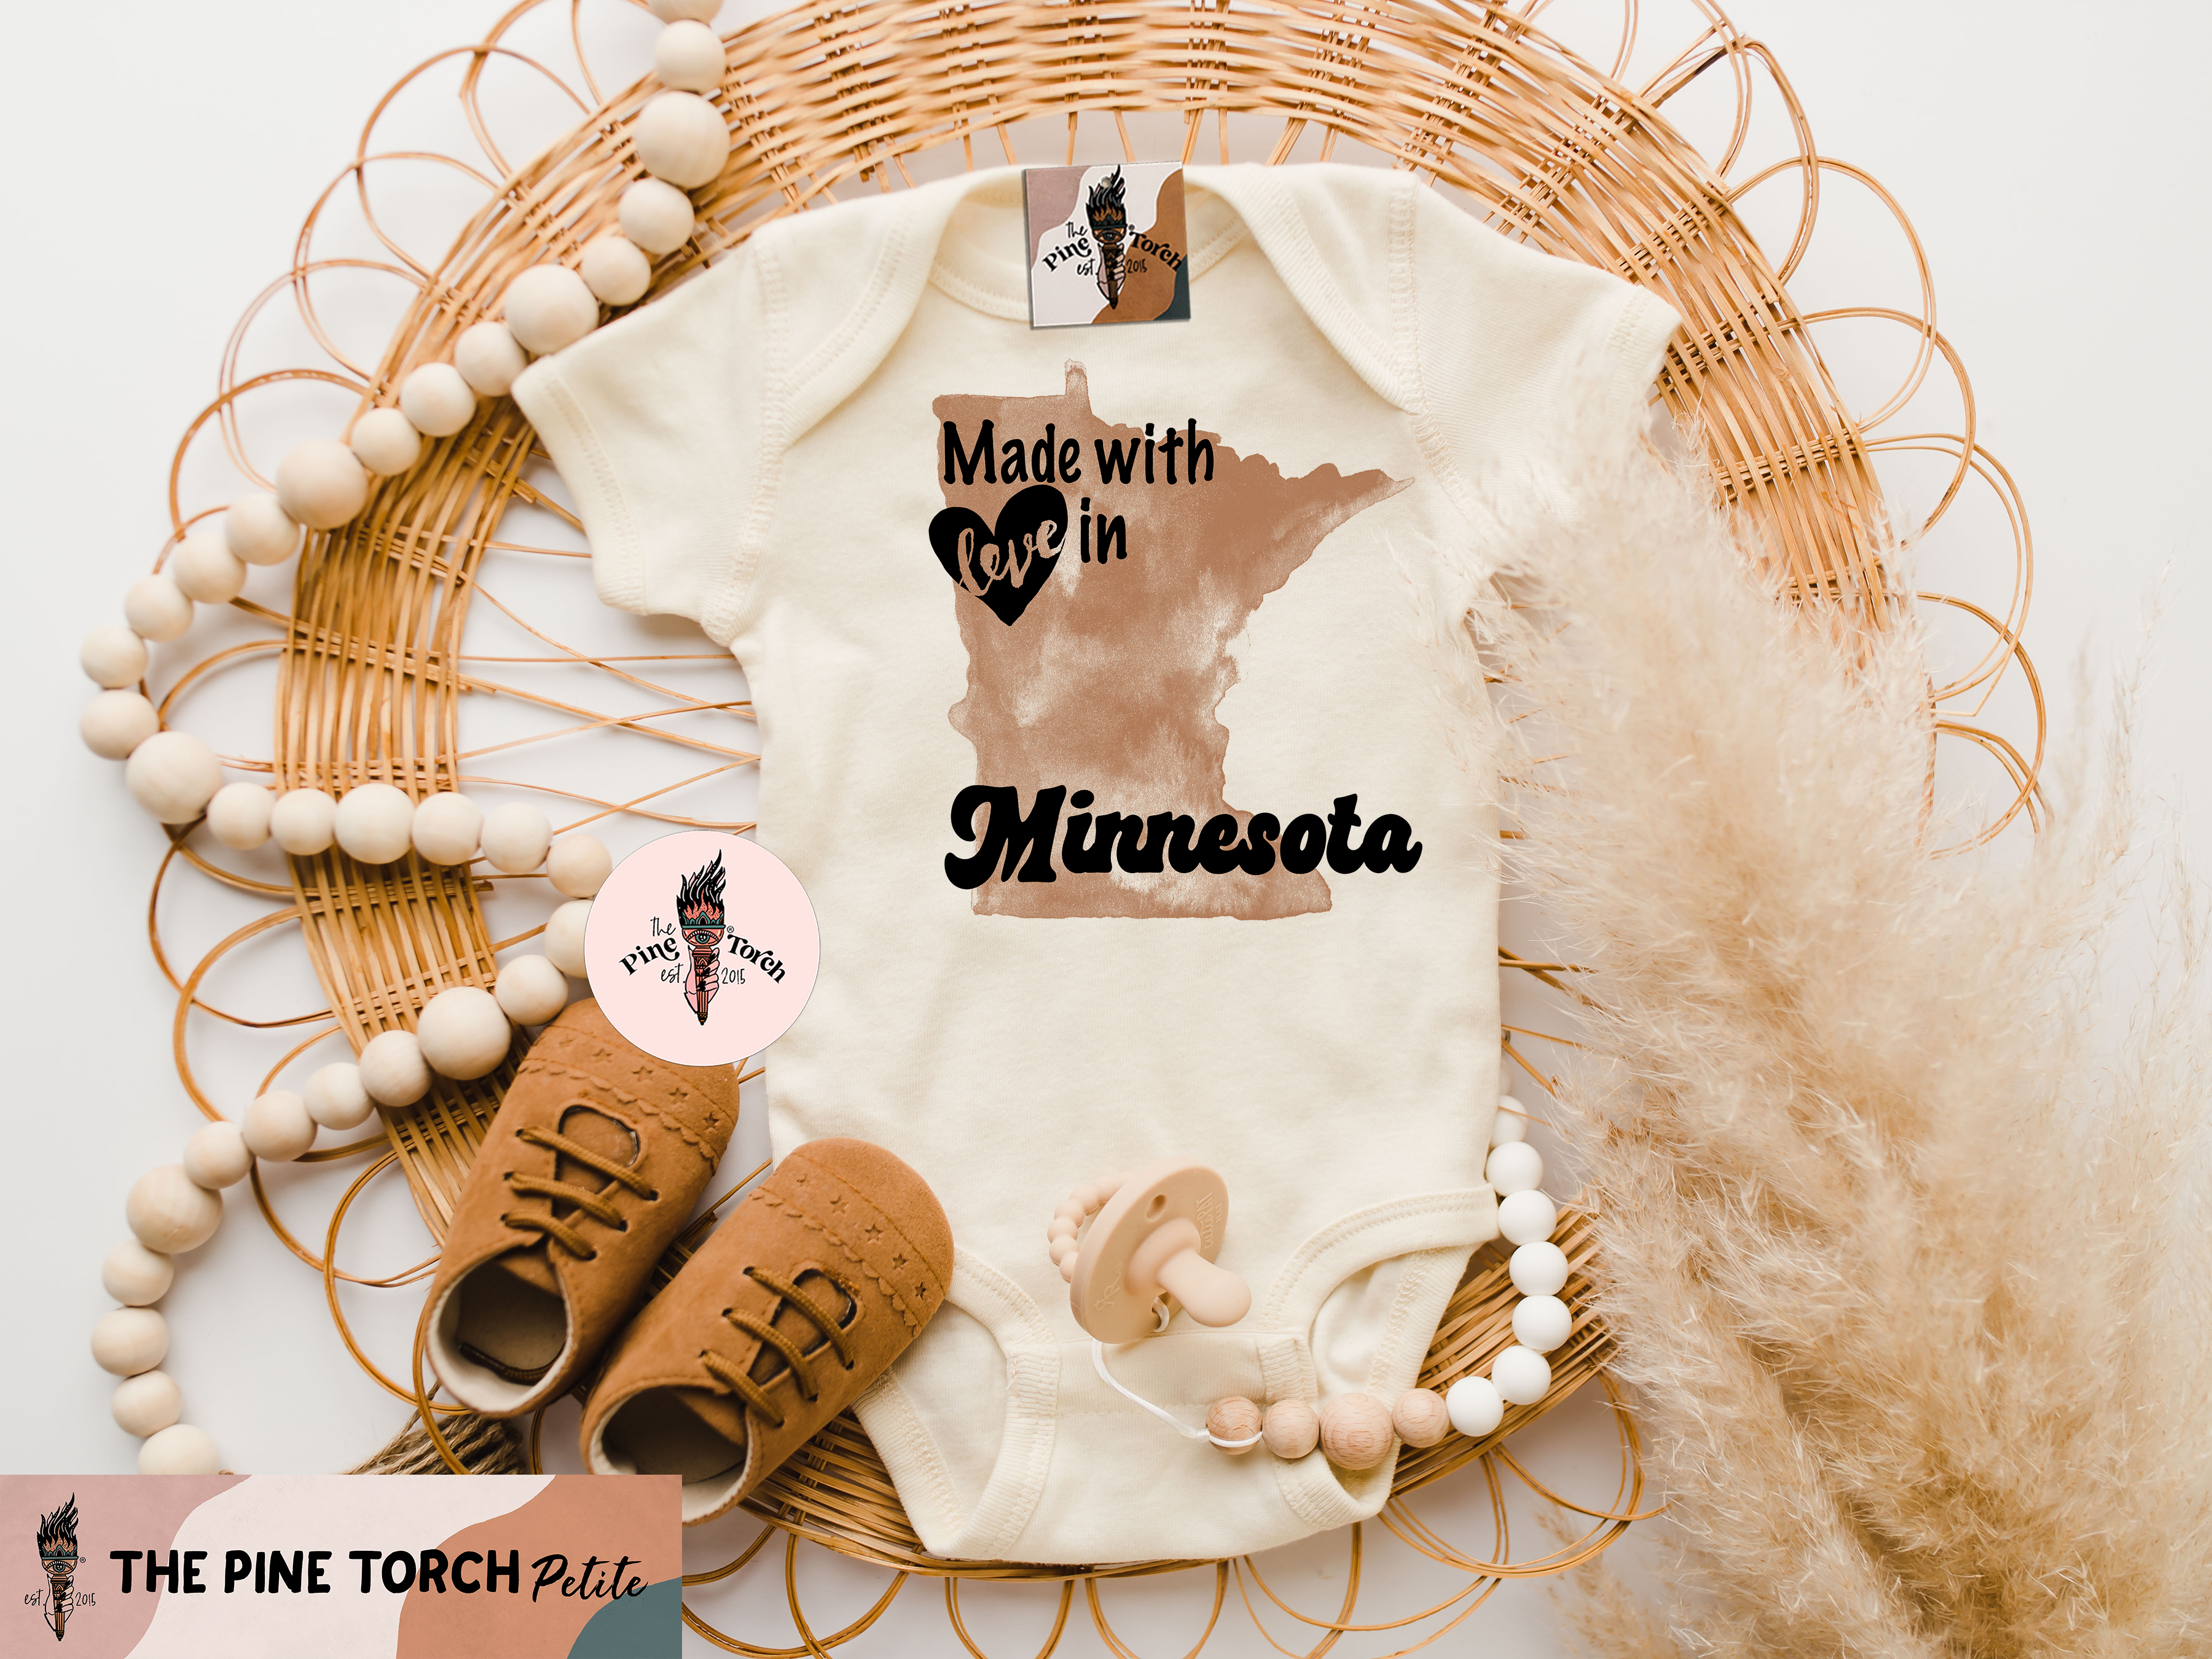 « MADE WITH LOVE IN MINNESOTA » BODYSUIT